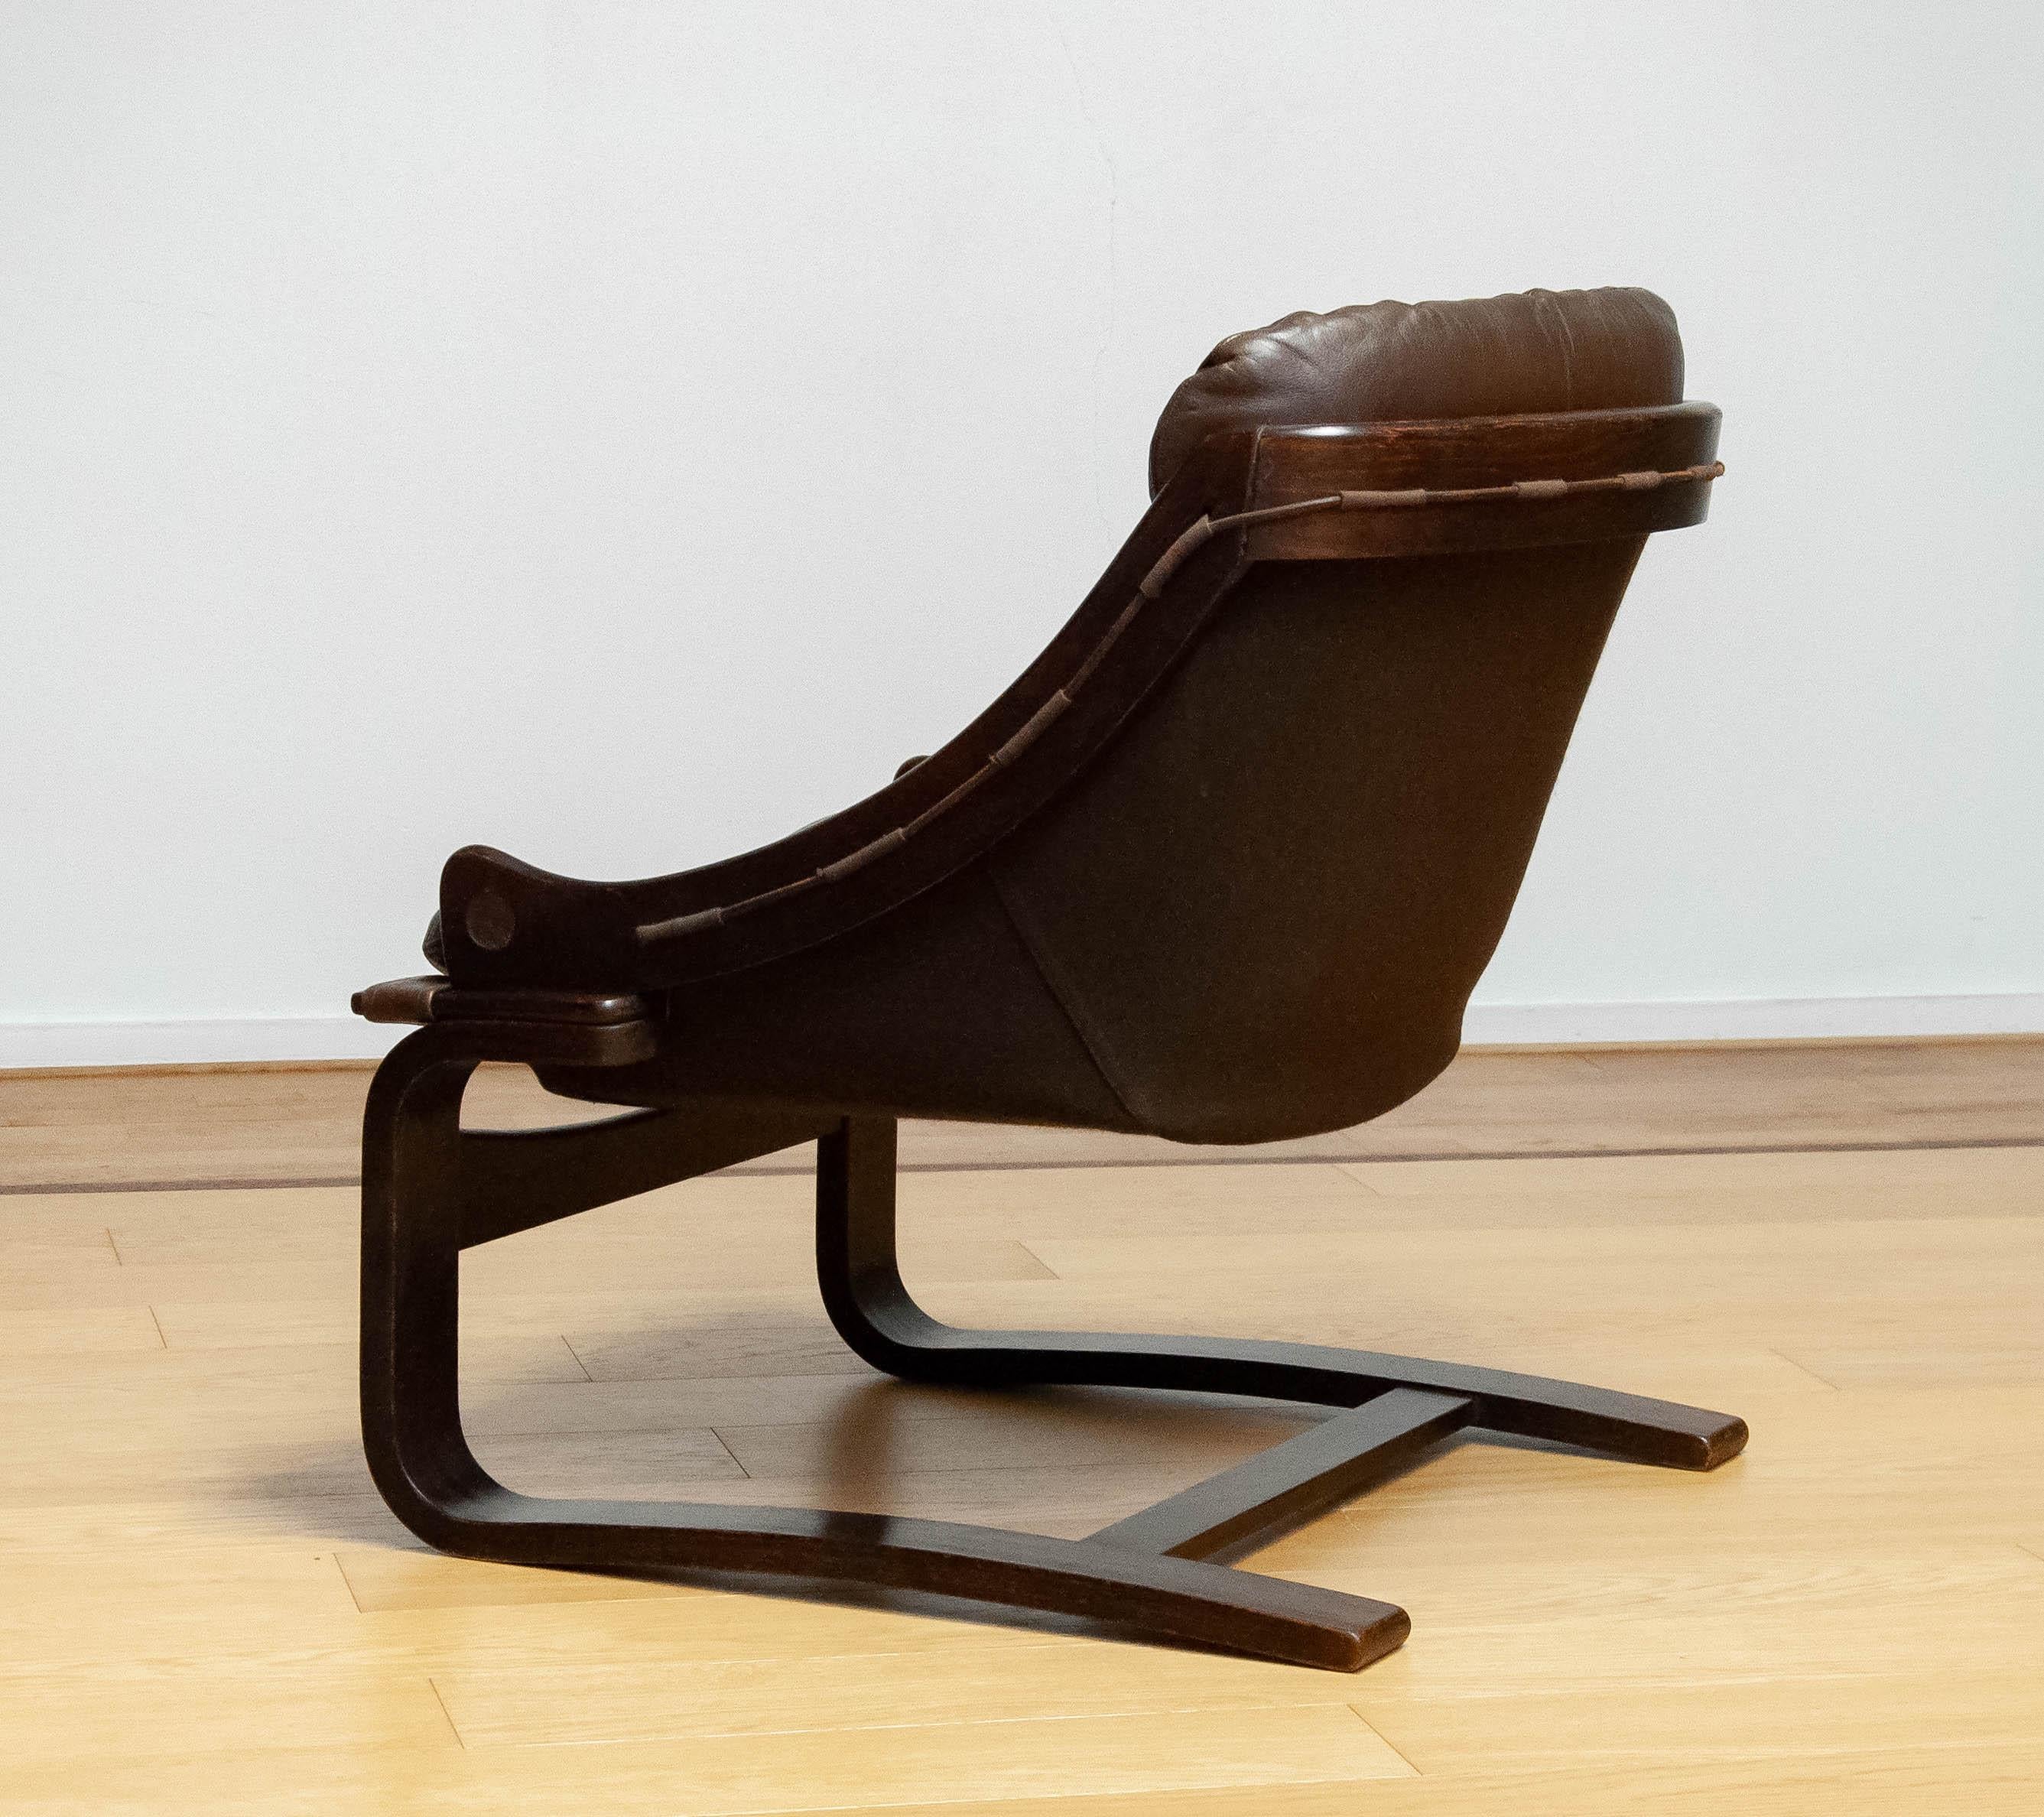 1970s Brown Leather Lounge Chair Model 'Krona' By Ake Fribytter For Nelo, Sweden For Sale 1